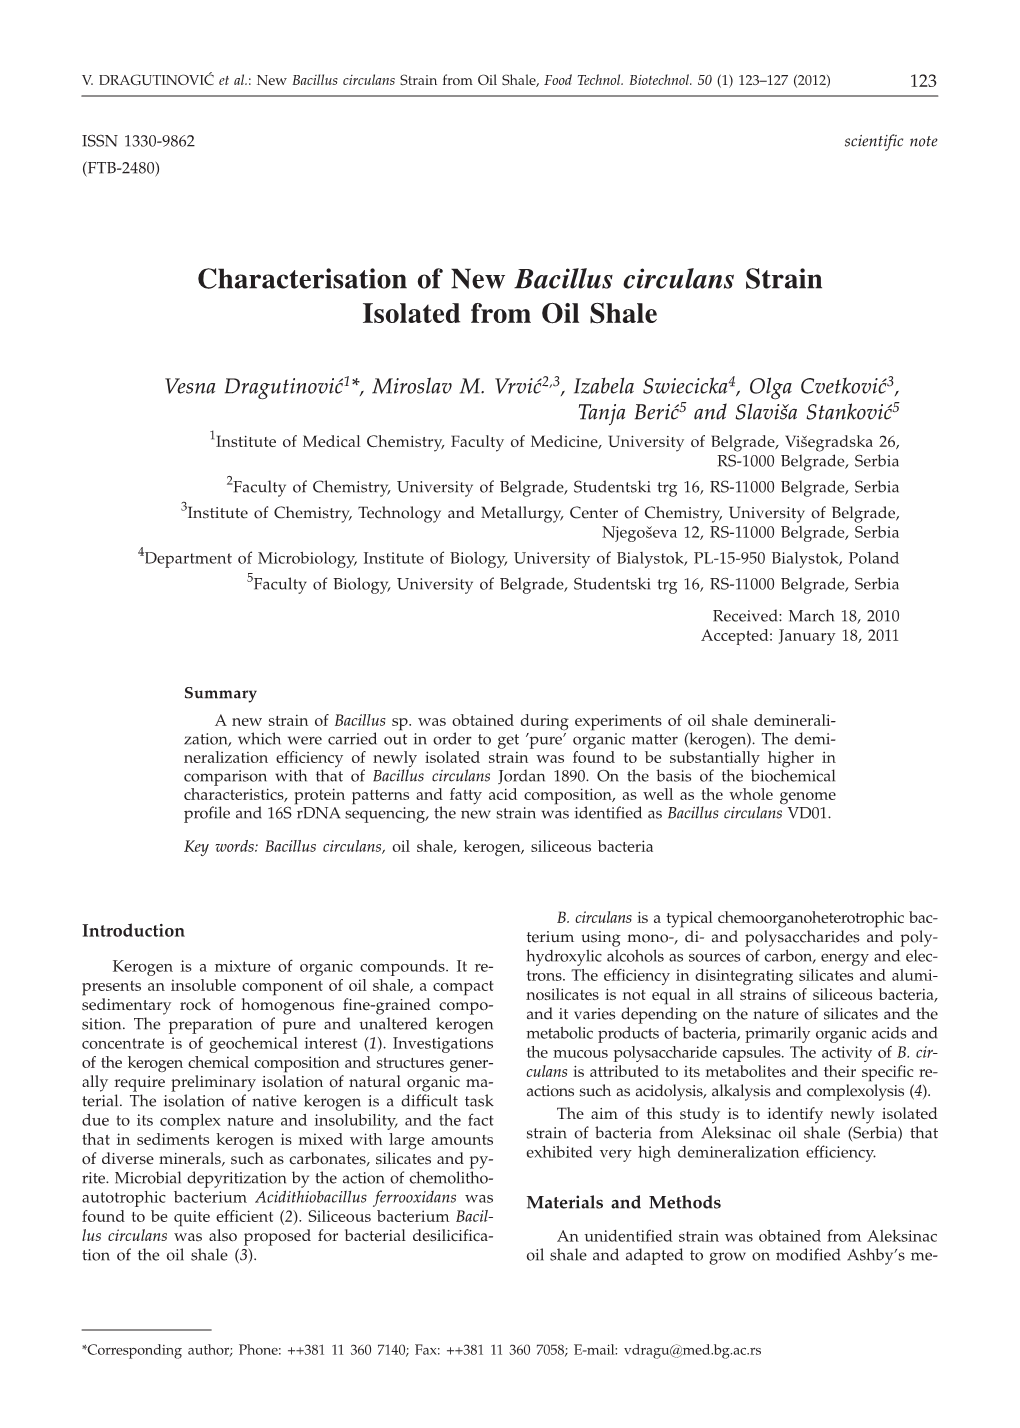 Characterisation of New Bacillus Circulans Strain Isolated from Oil Shale